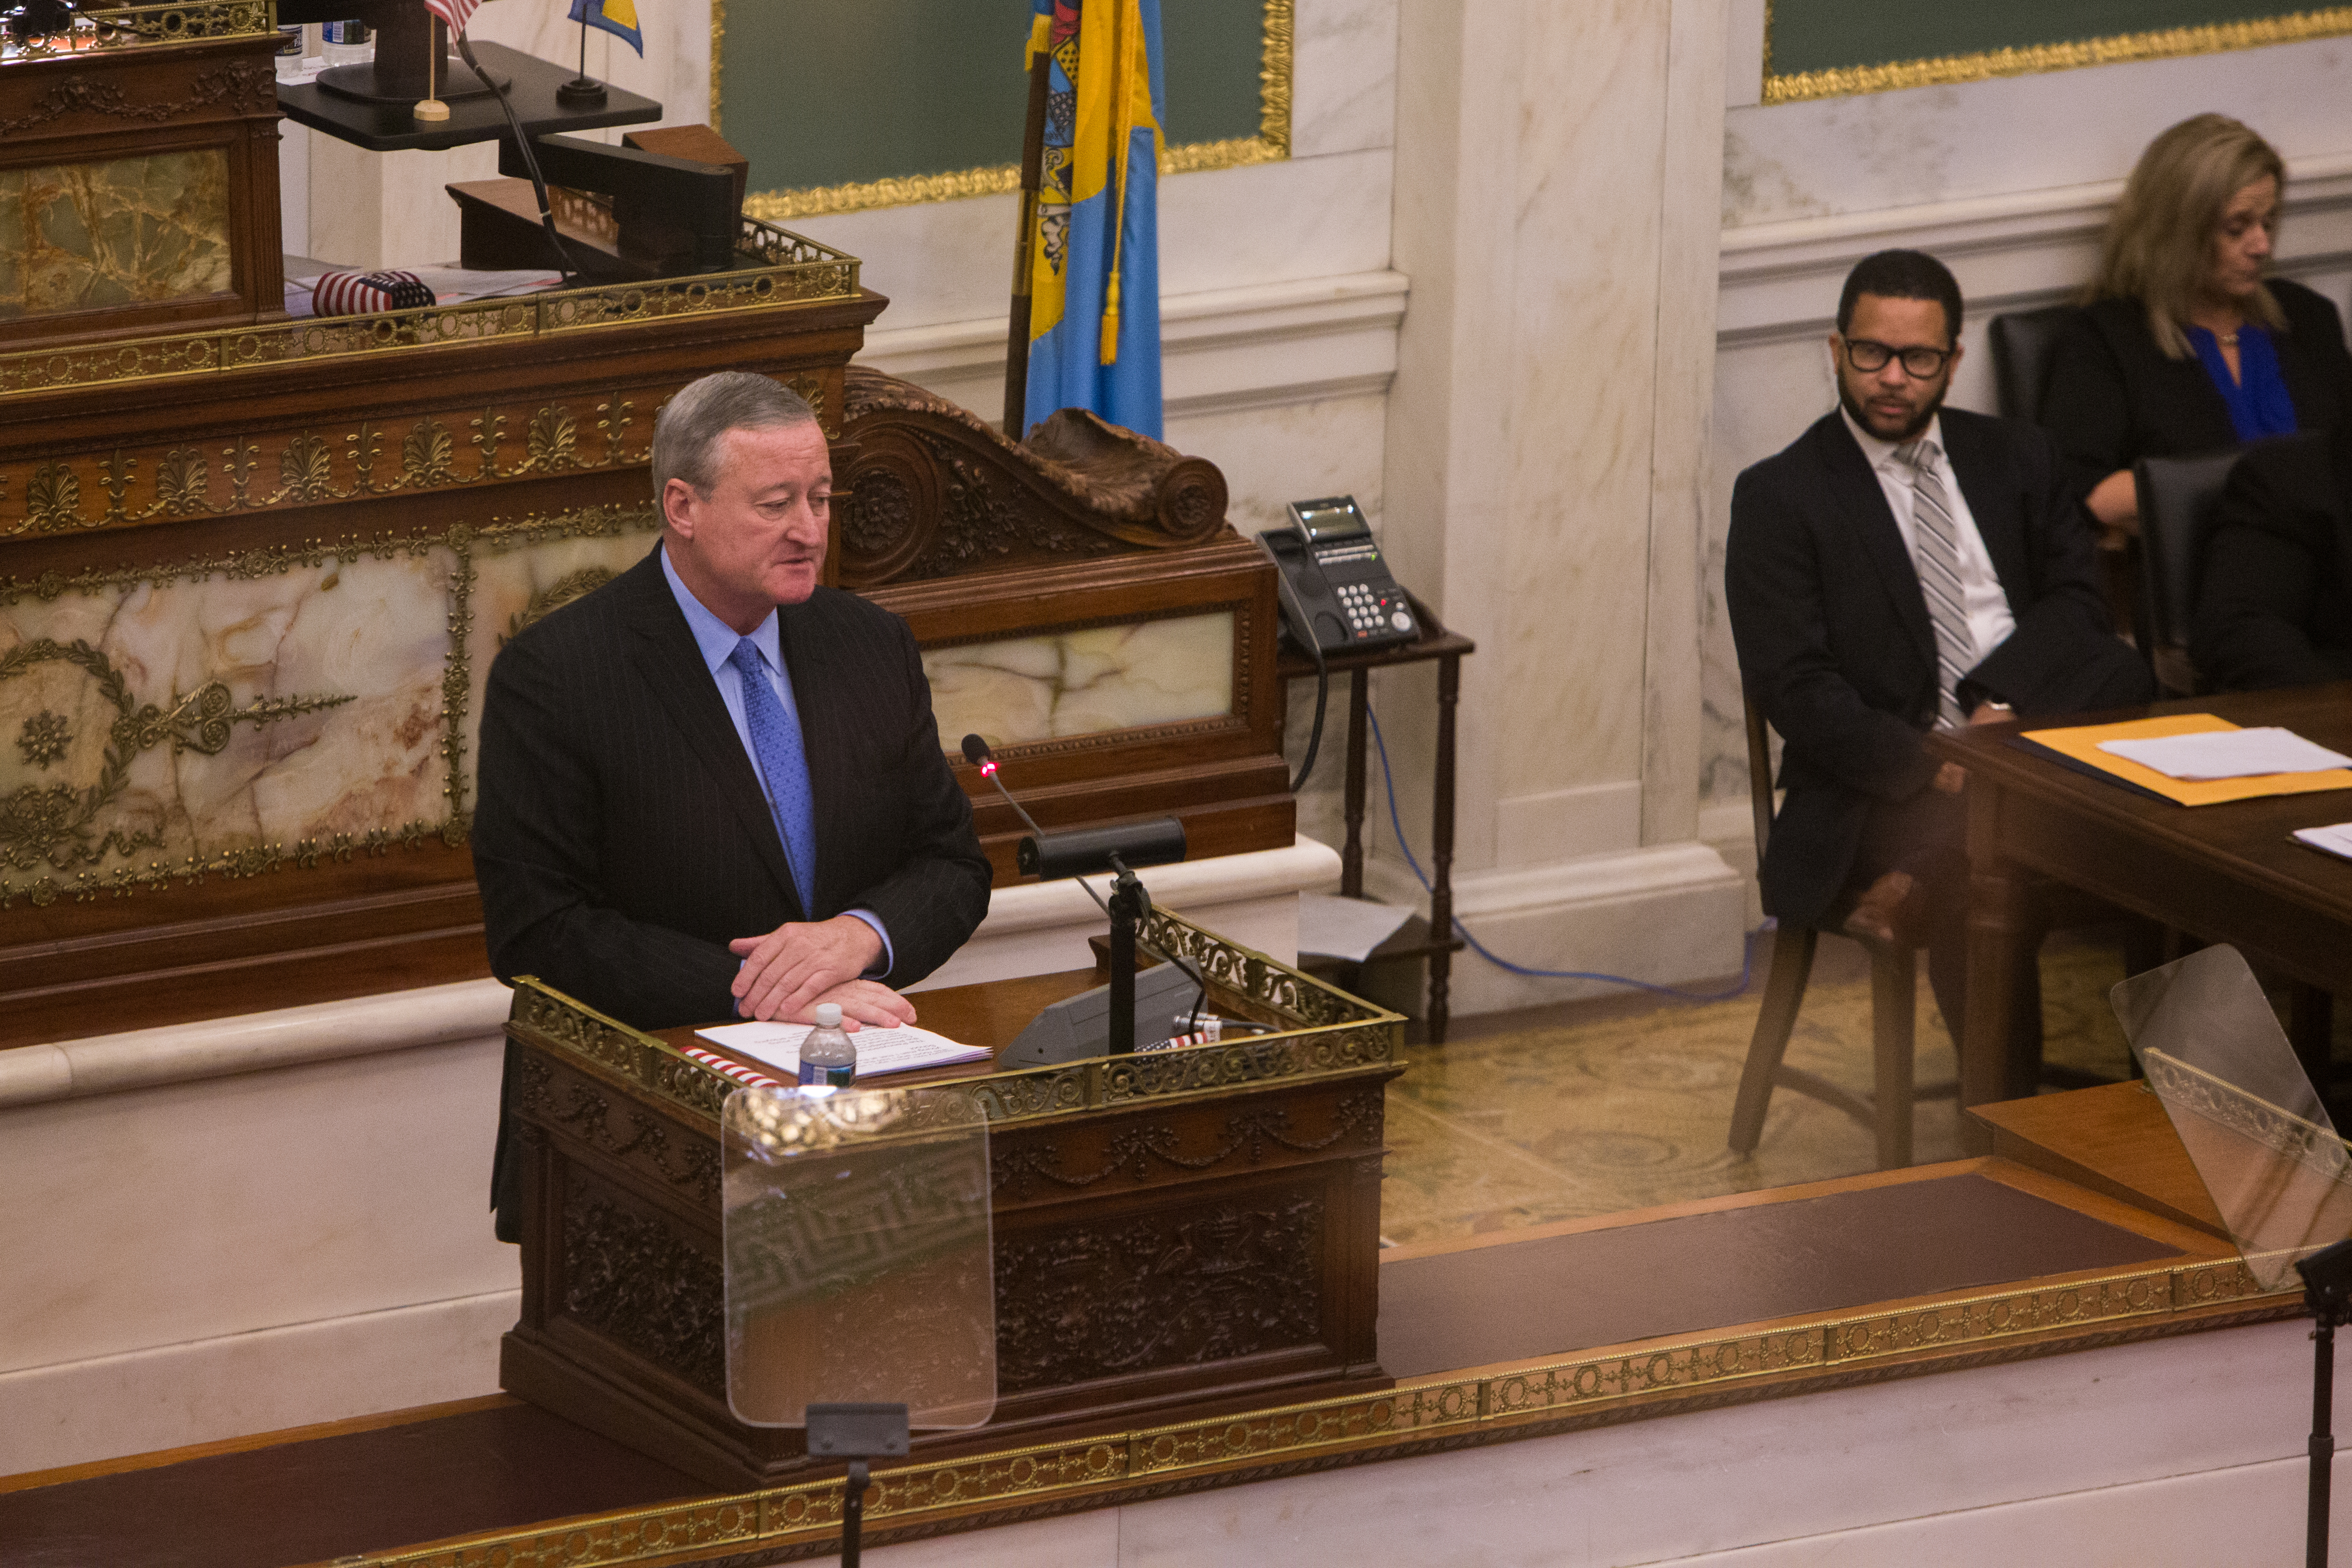 Mayor Jim Kenney at the School Reform Commission Conference last fall. Mayor Kenney will select nine of the 27 candidates proposed by the Education Nominating Panel to serve on the city's new Board of Education. Samantha Laub/AL DÍA News 